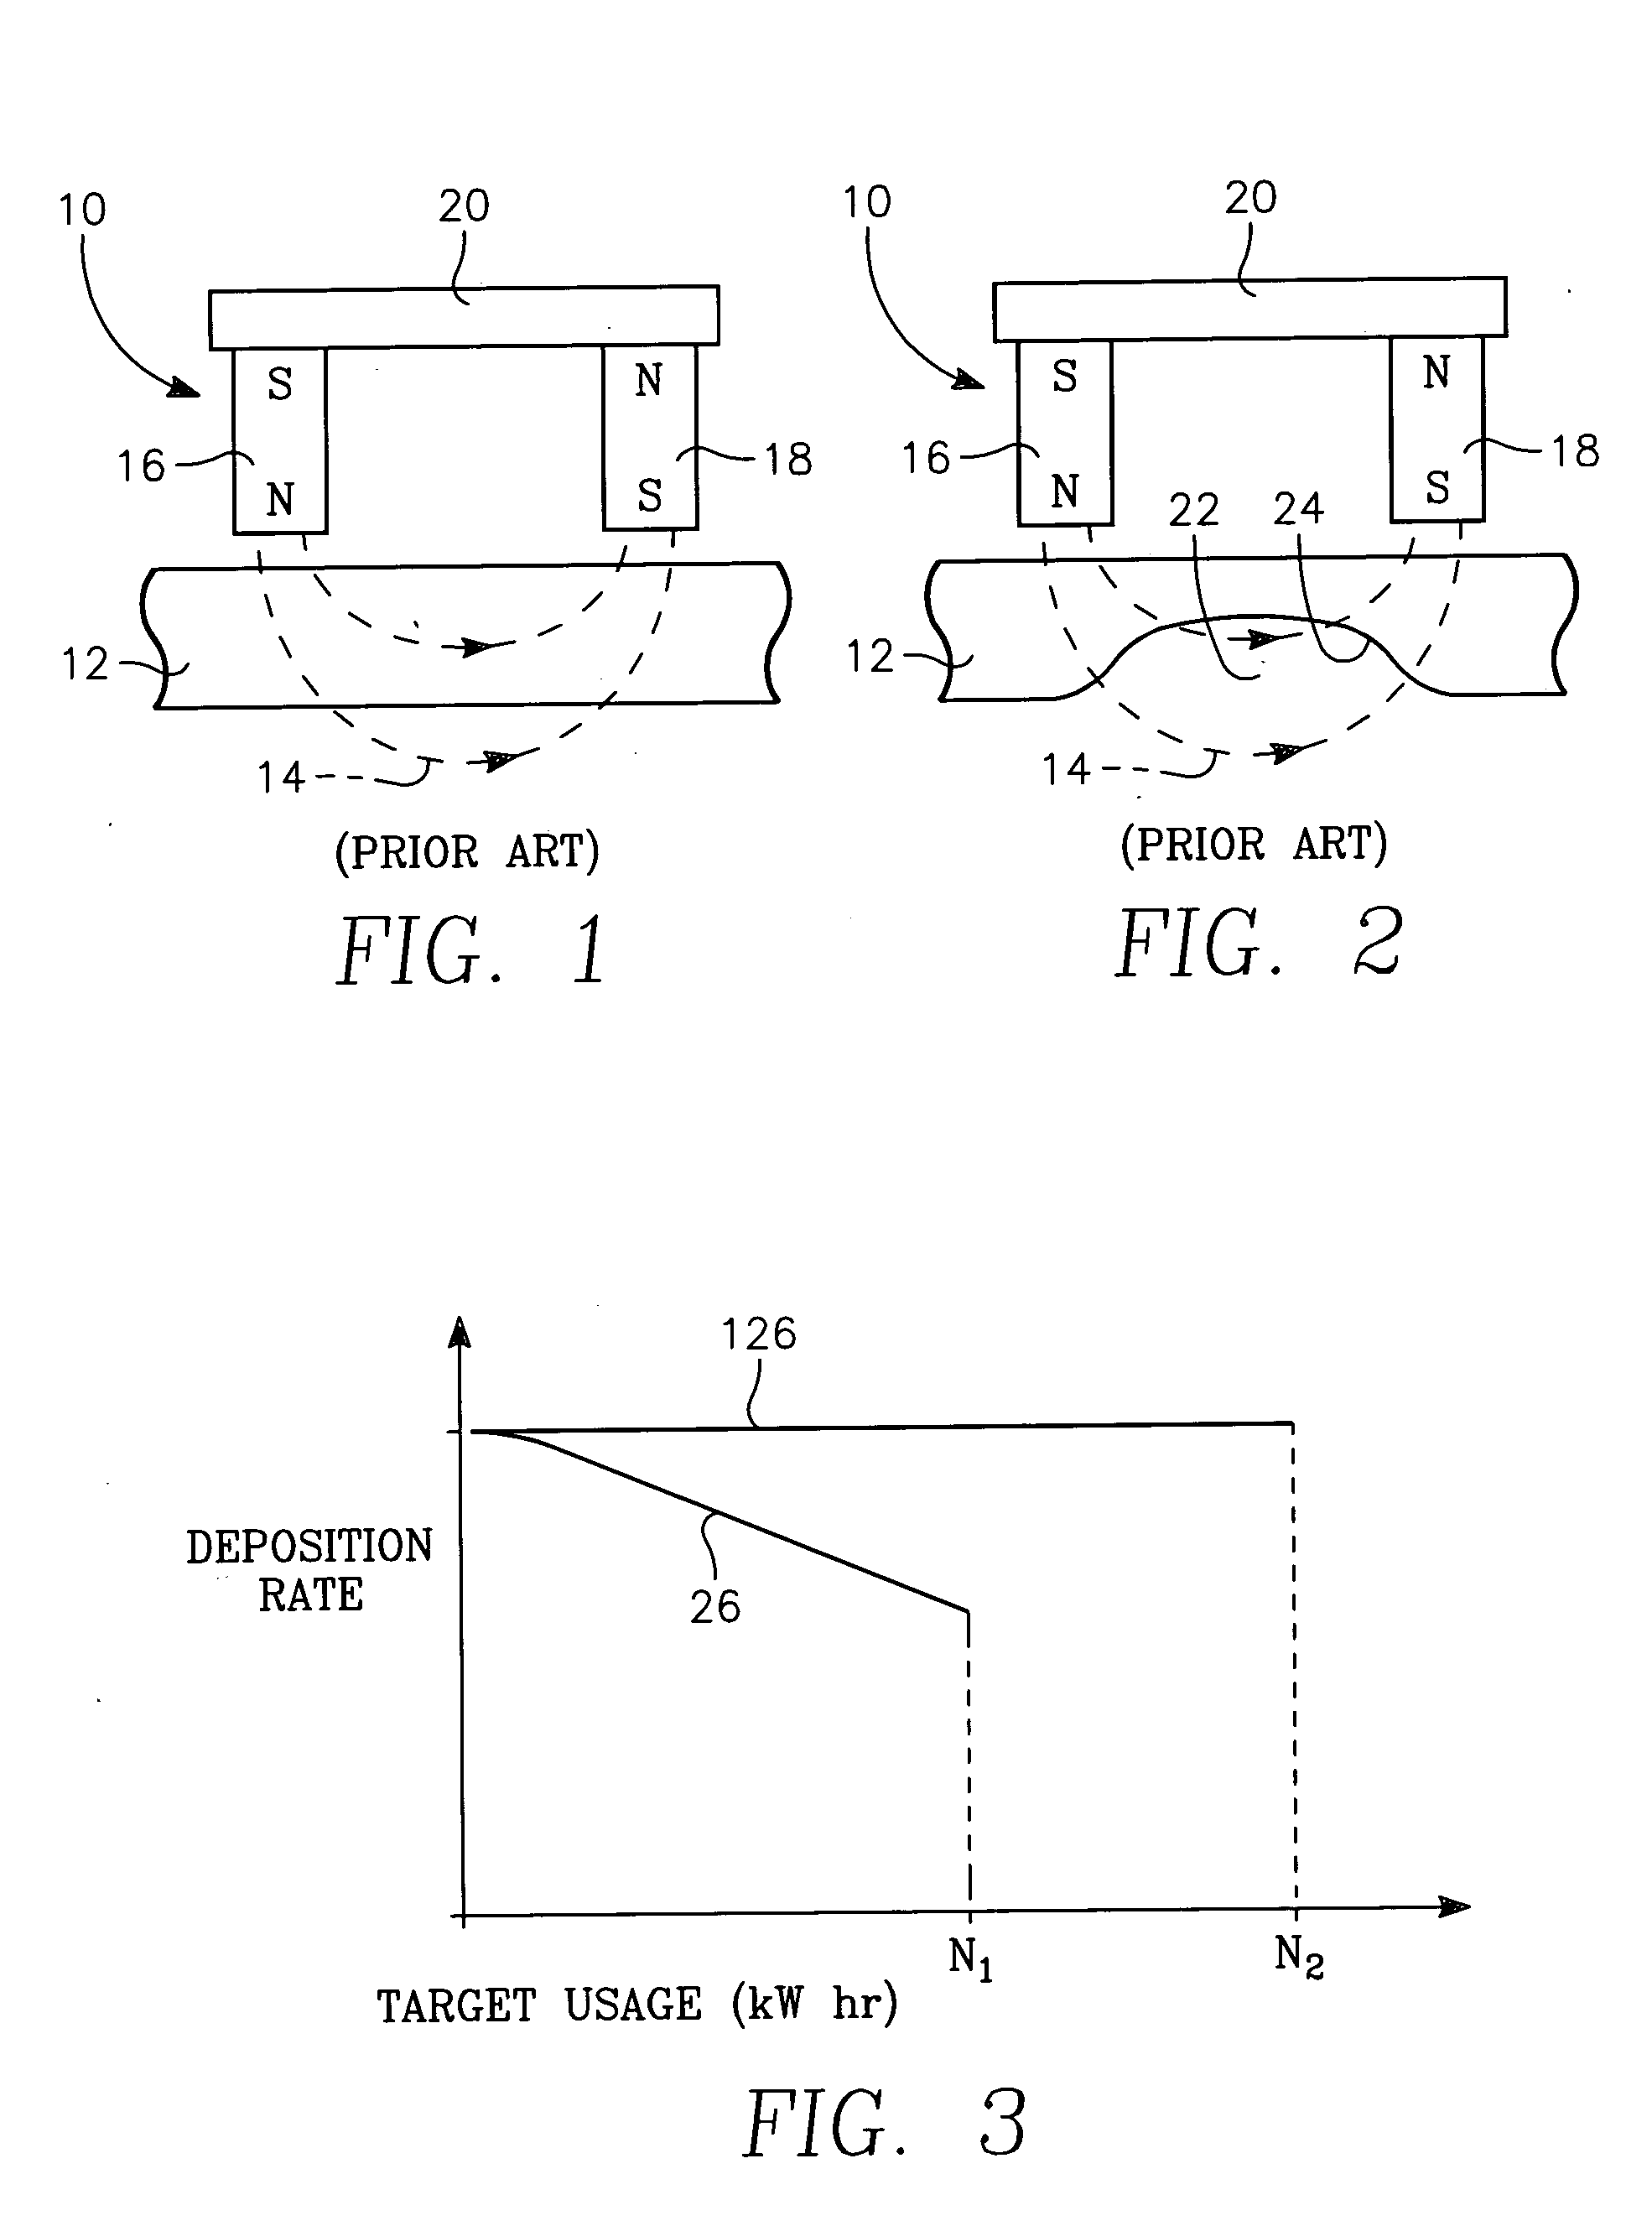 Mechanism for varying the spacing between sputter magnetron and target